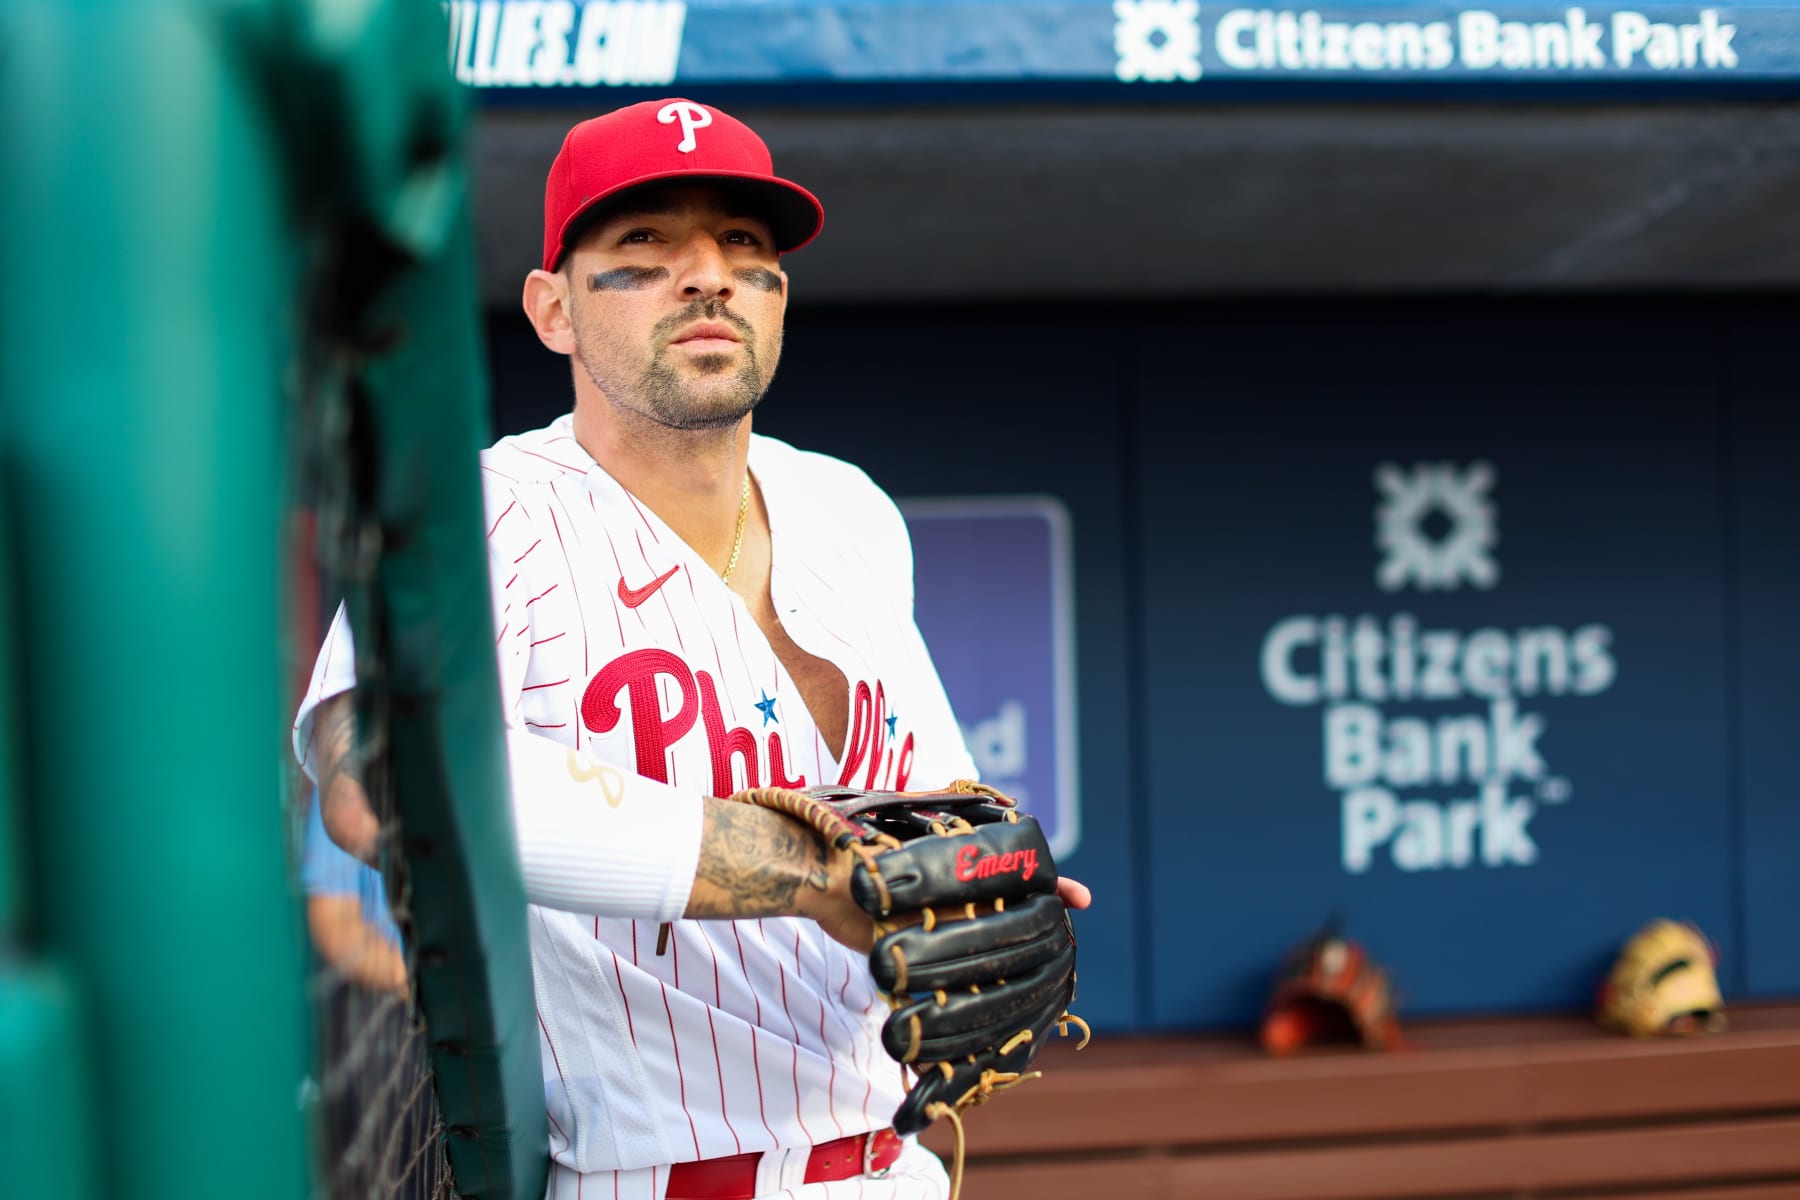 PHILLIES LINEUP IS LETHAL!! Castellanos SIGNED!! 2022 TEAM PREVIEW with  PHILLIES HOT STOVE MEDIA! 